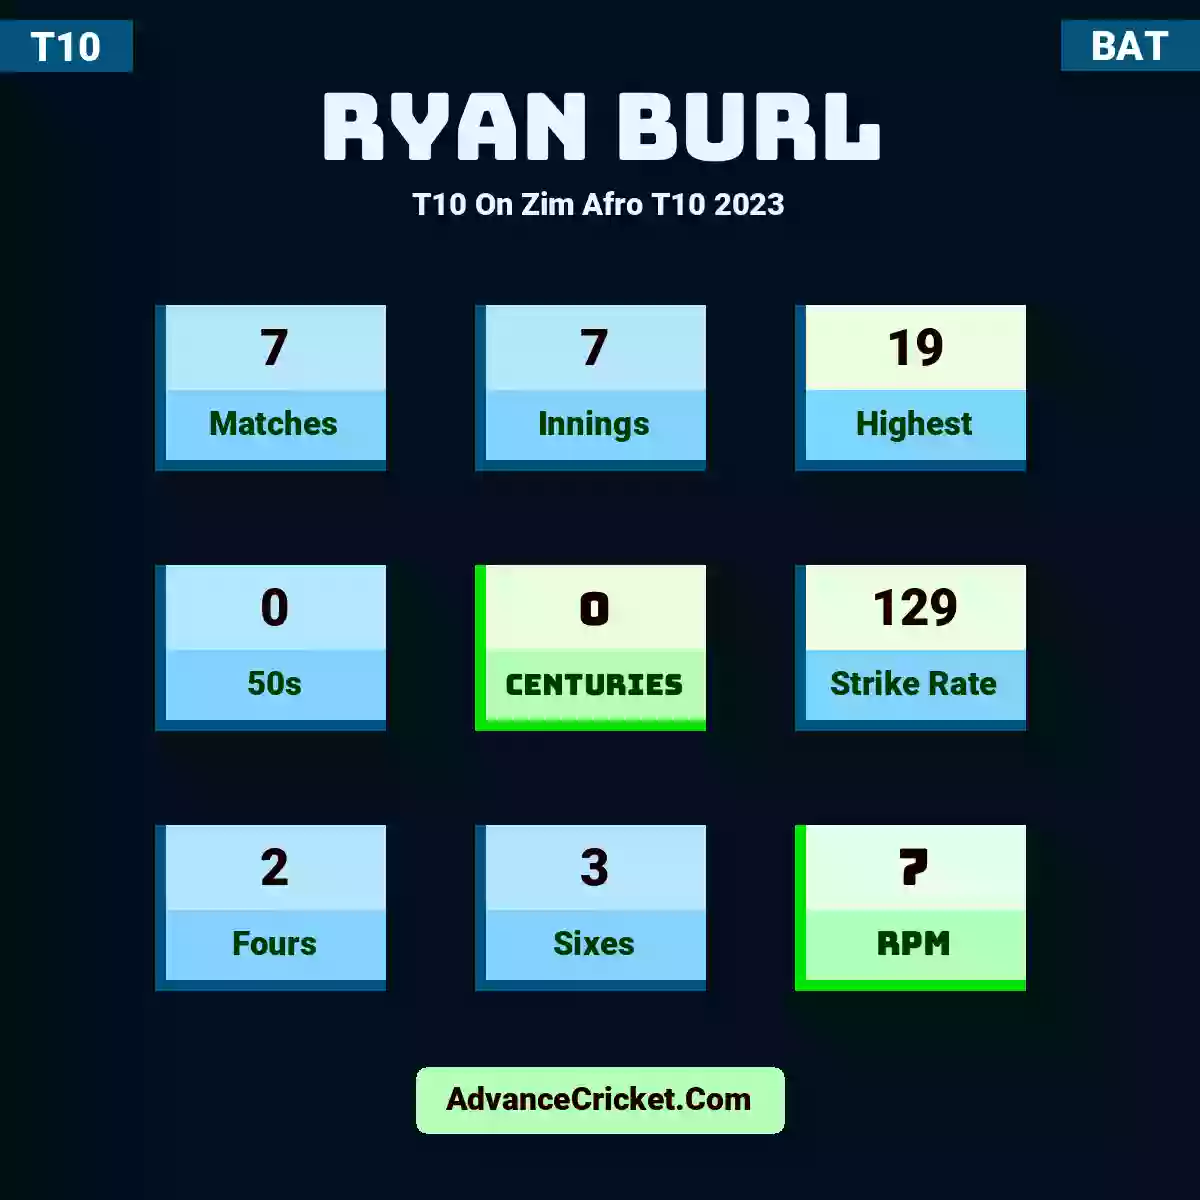 Ryan Burl T10  On Zim Afro T10 2023, Ryan Burl played 7 matches, scored 19 runs as highest, 0 half-centuries, and 0 centuries, with a strike rate of 129. R.Burl hit 2 fours and 3 sixes, with an RPM of 7.